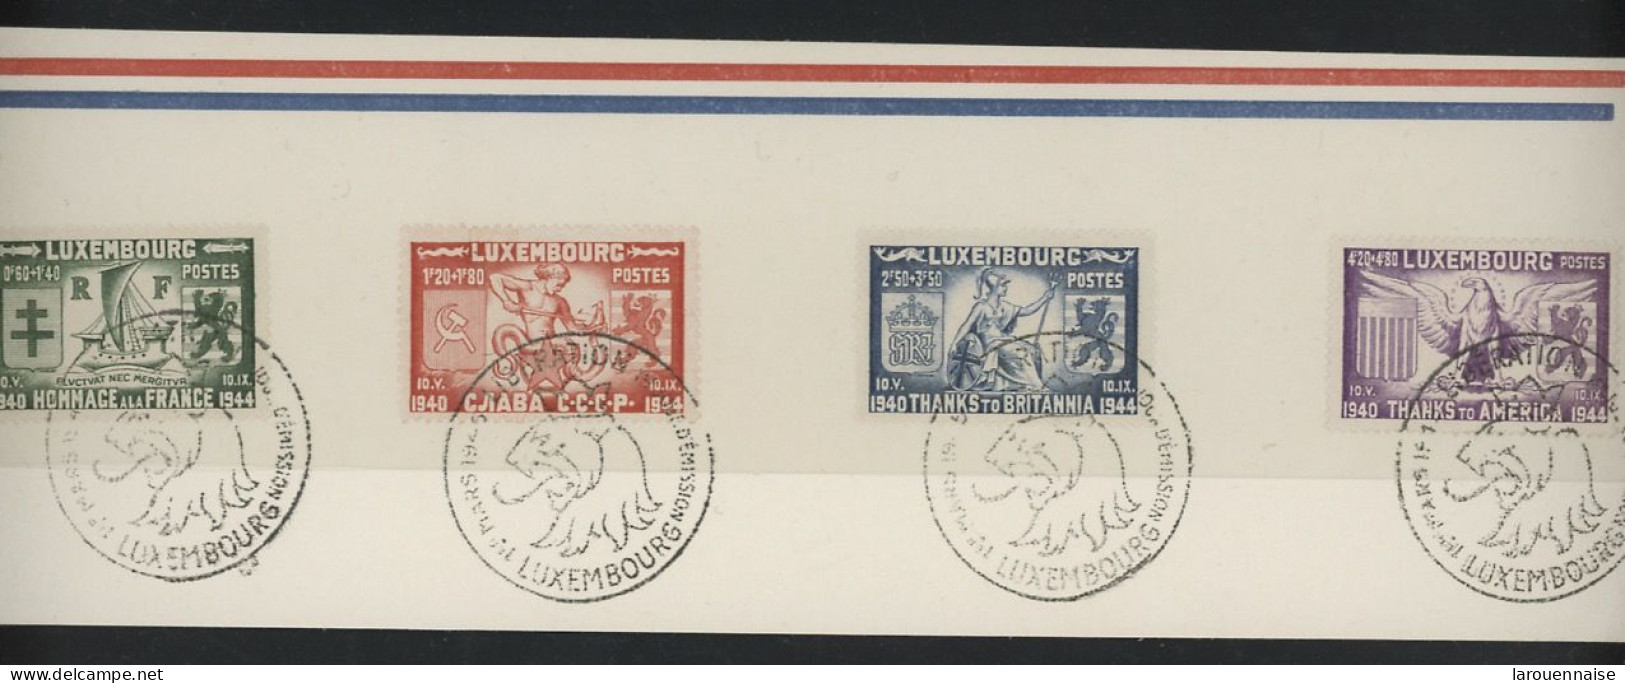 LUXEMBOURG -N°356 /59 HOMMAGE AUX NATIONS LIBERATRICES- FDC -1er MARS 1945 - FDC